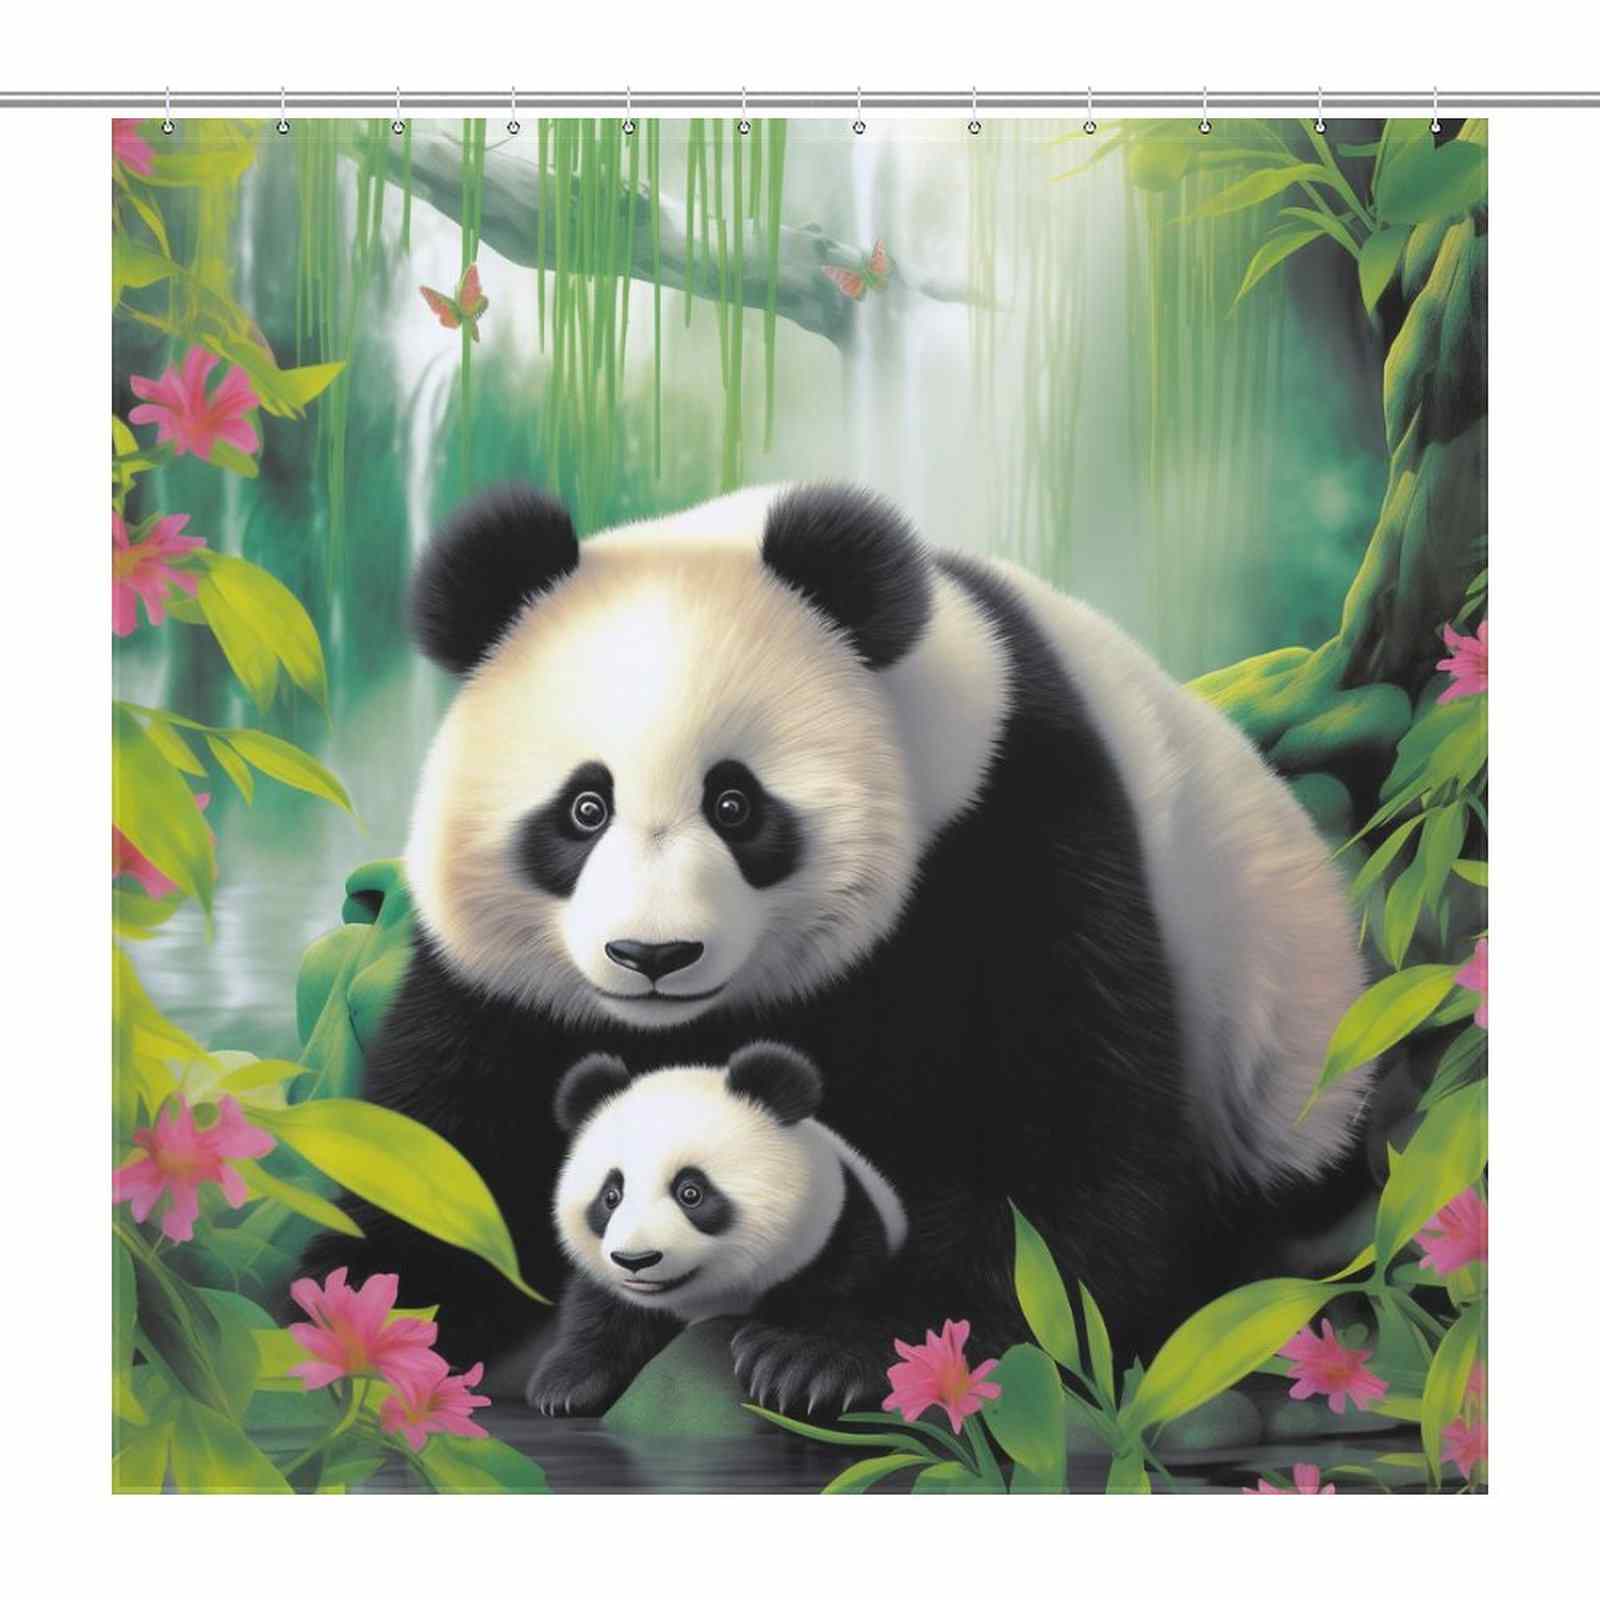 A pair of adorable 3D Cute Panda Shower Curtain-Cottoncat enjoying the serenity of the forest.